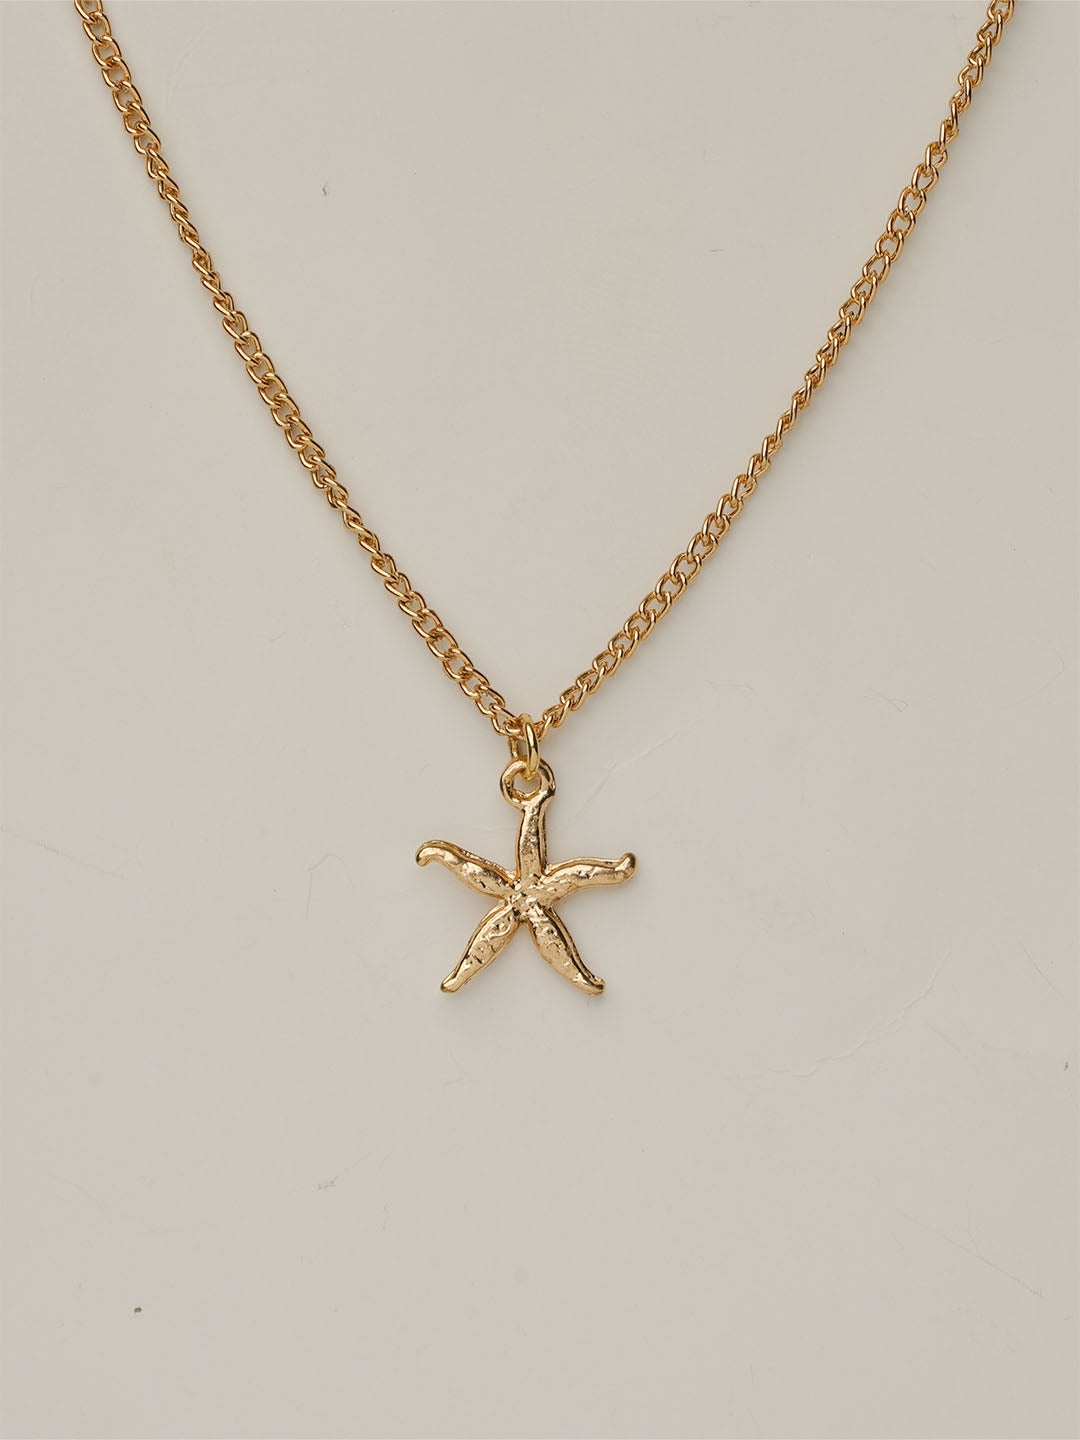 Buy 14k Gold Starfish Necklace Gleaming Sea Star Ocean & Marine Jewelry,  Regeneration, Prosperity, Resiliance Pendant, Valentine's Day Gift Online  in India - Etsy